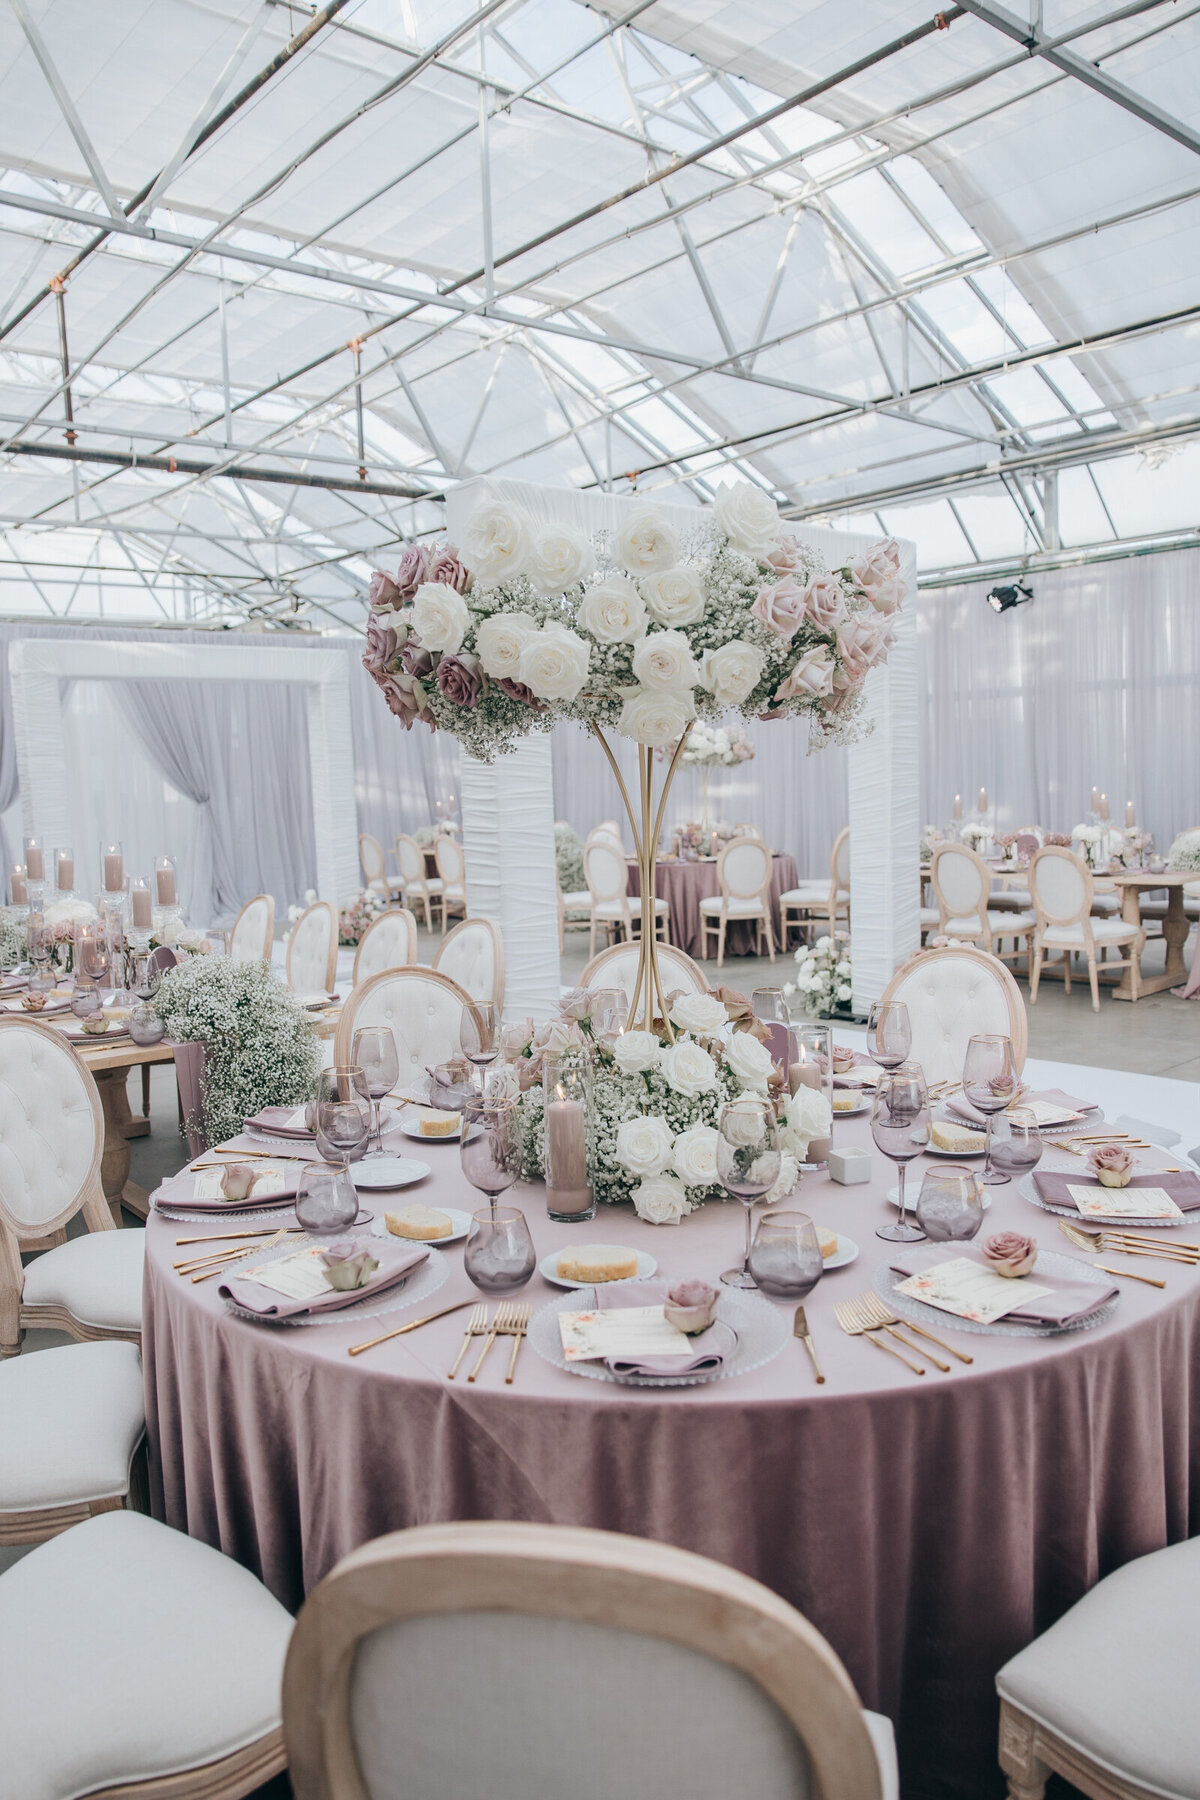 Gorgeous lavender and ivory themed wedding reception photographed by Nova Markina